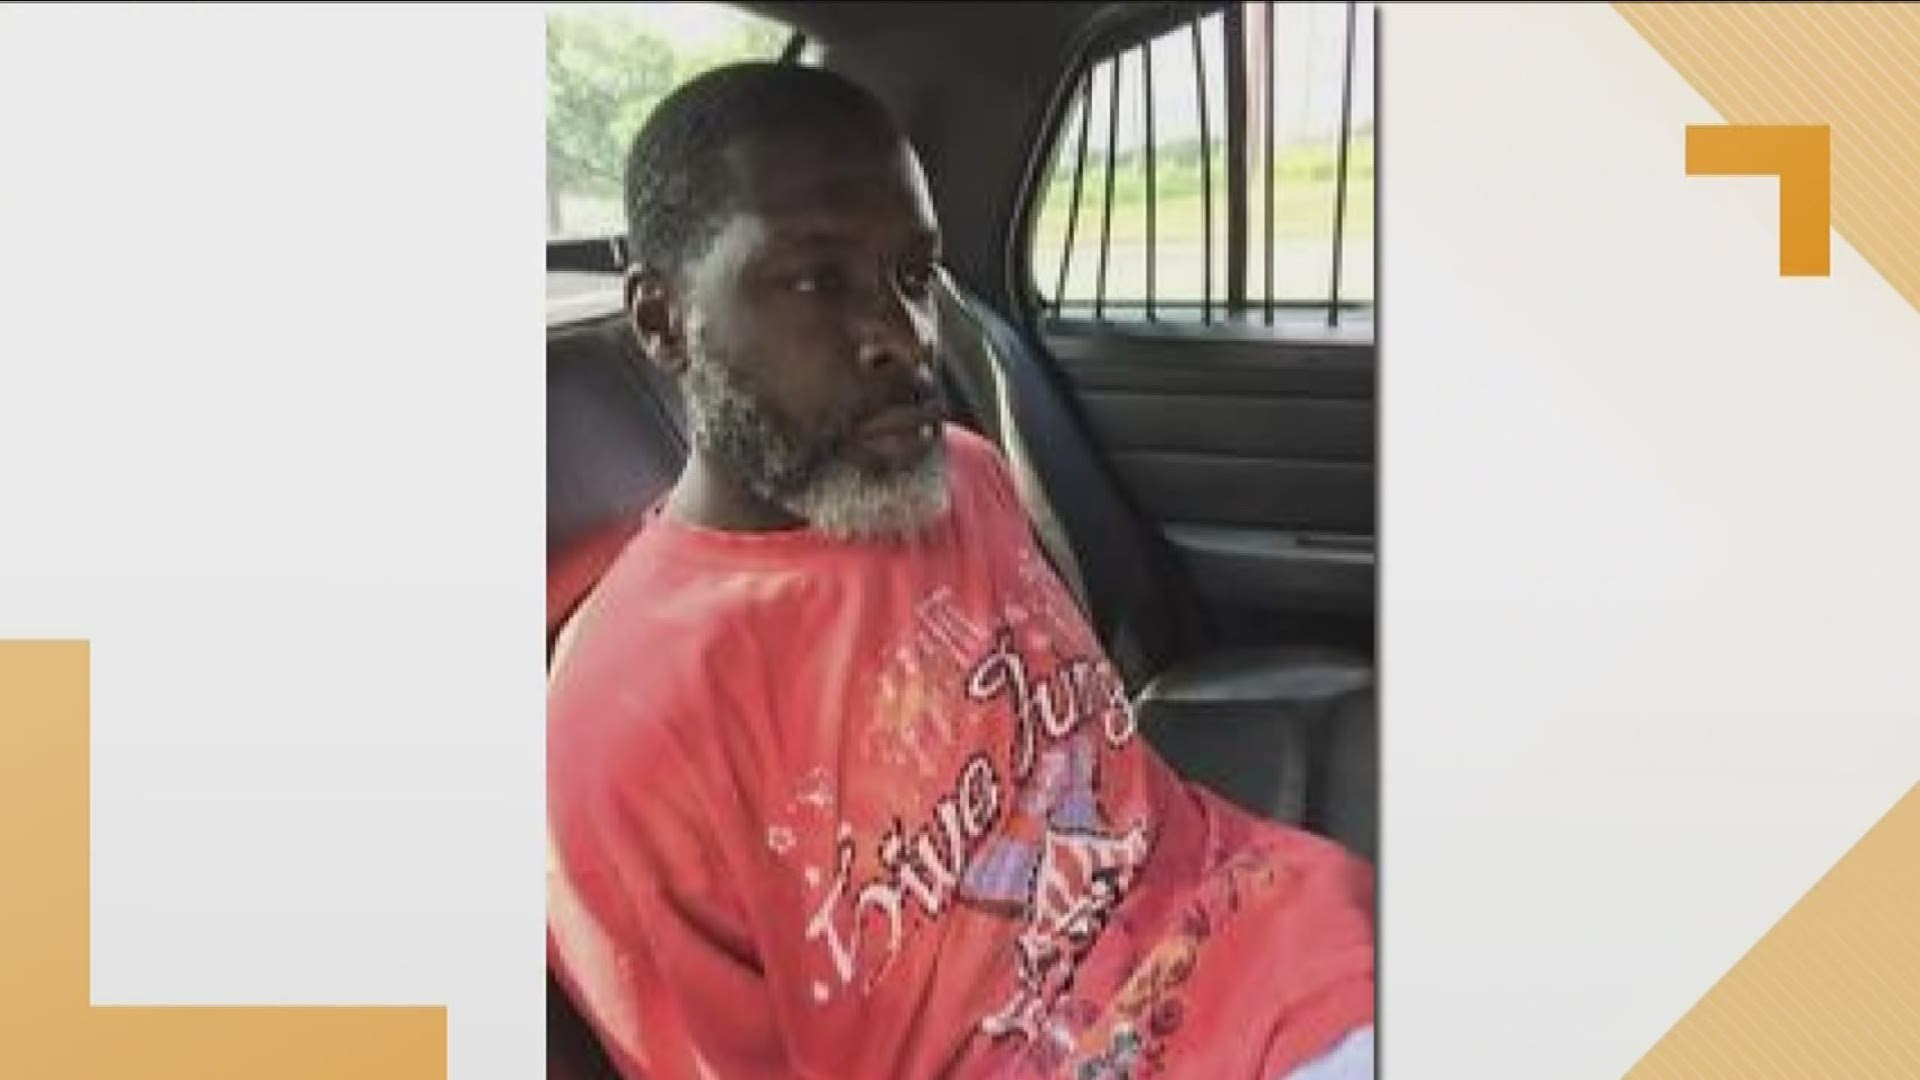 A man who police said shot his son was finally taken into custody after a bizarre series of events: Larry Cokely had a relative take him to the Clayton County Jail so he could surrender. Police said he wasn't wanted and let him go. Once they realized their mistake, they found him about a mile away and took him into custody.